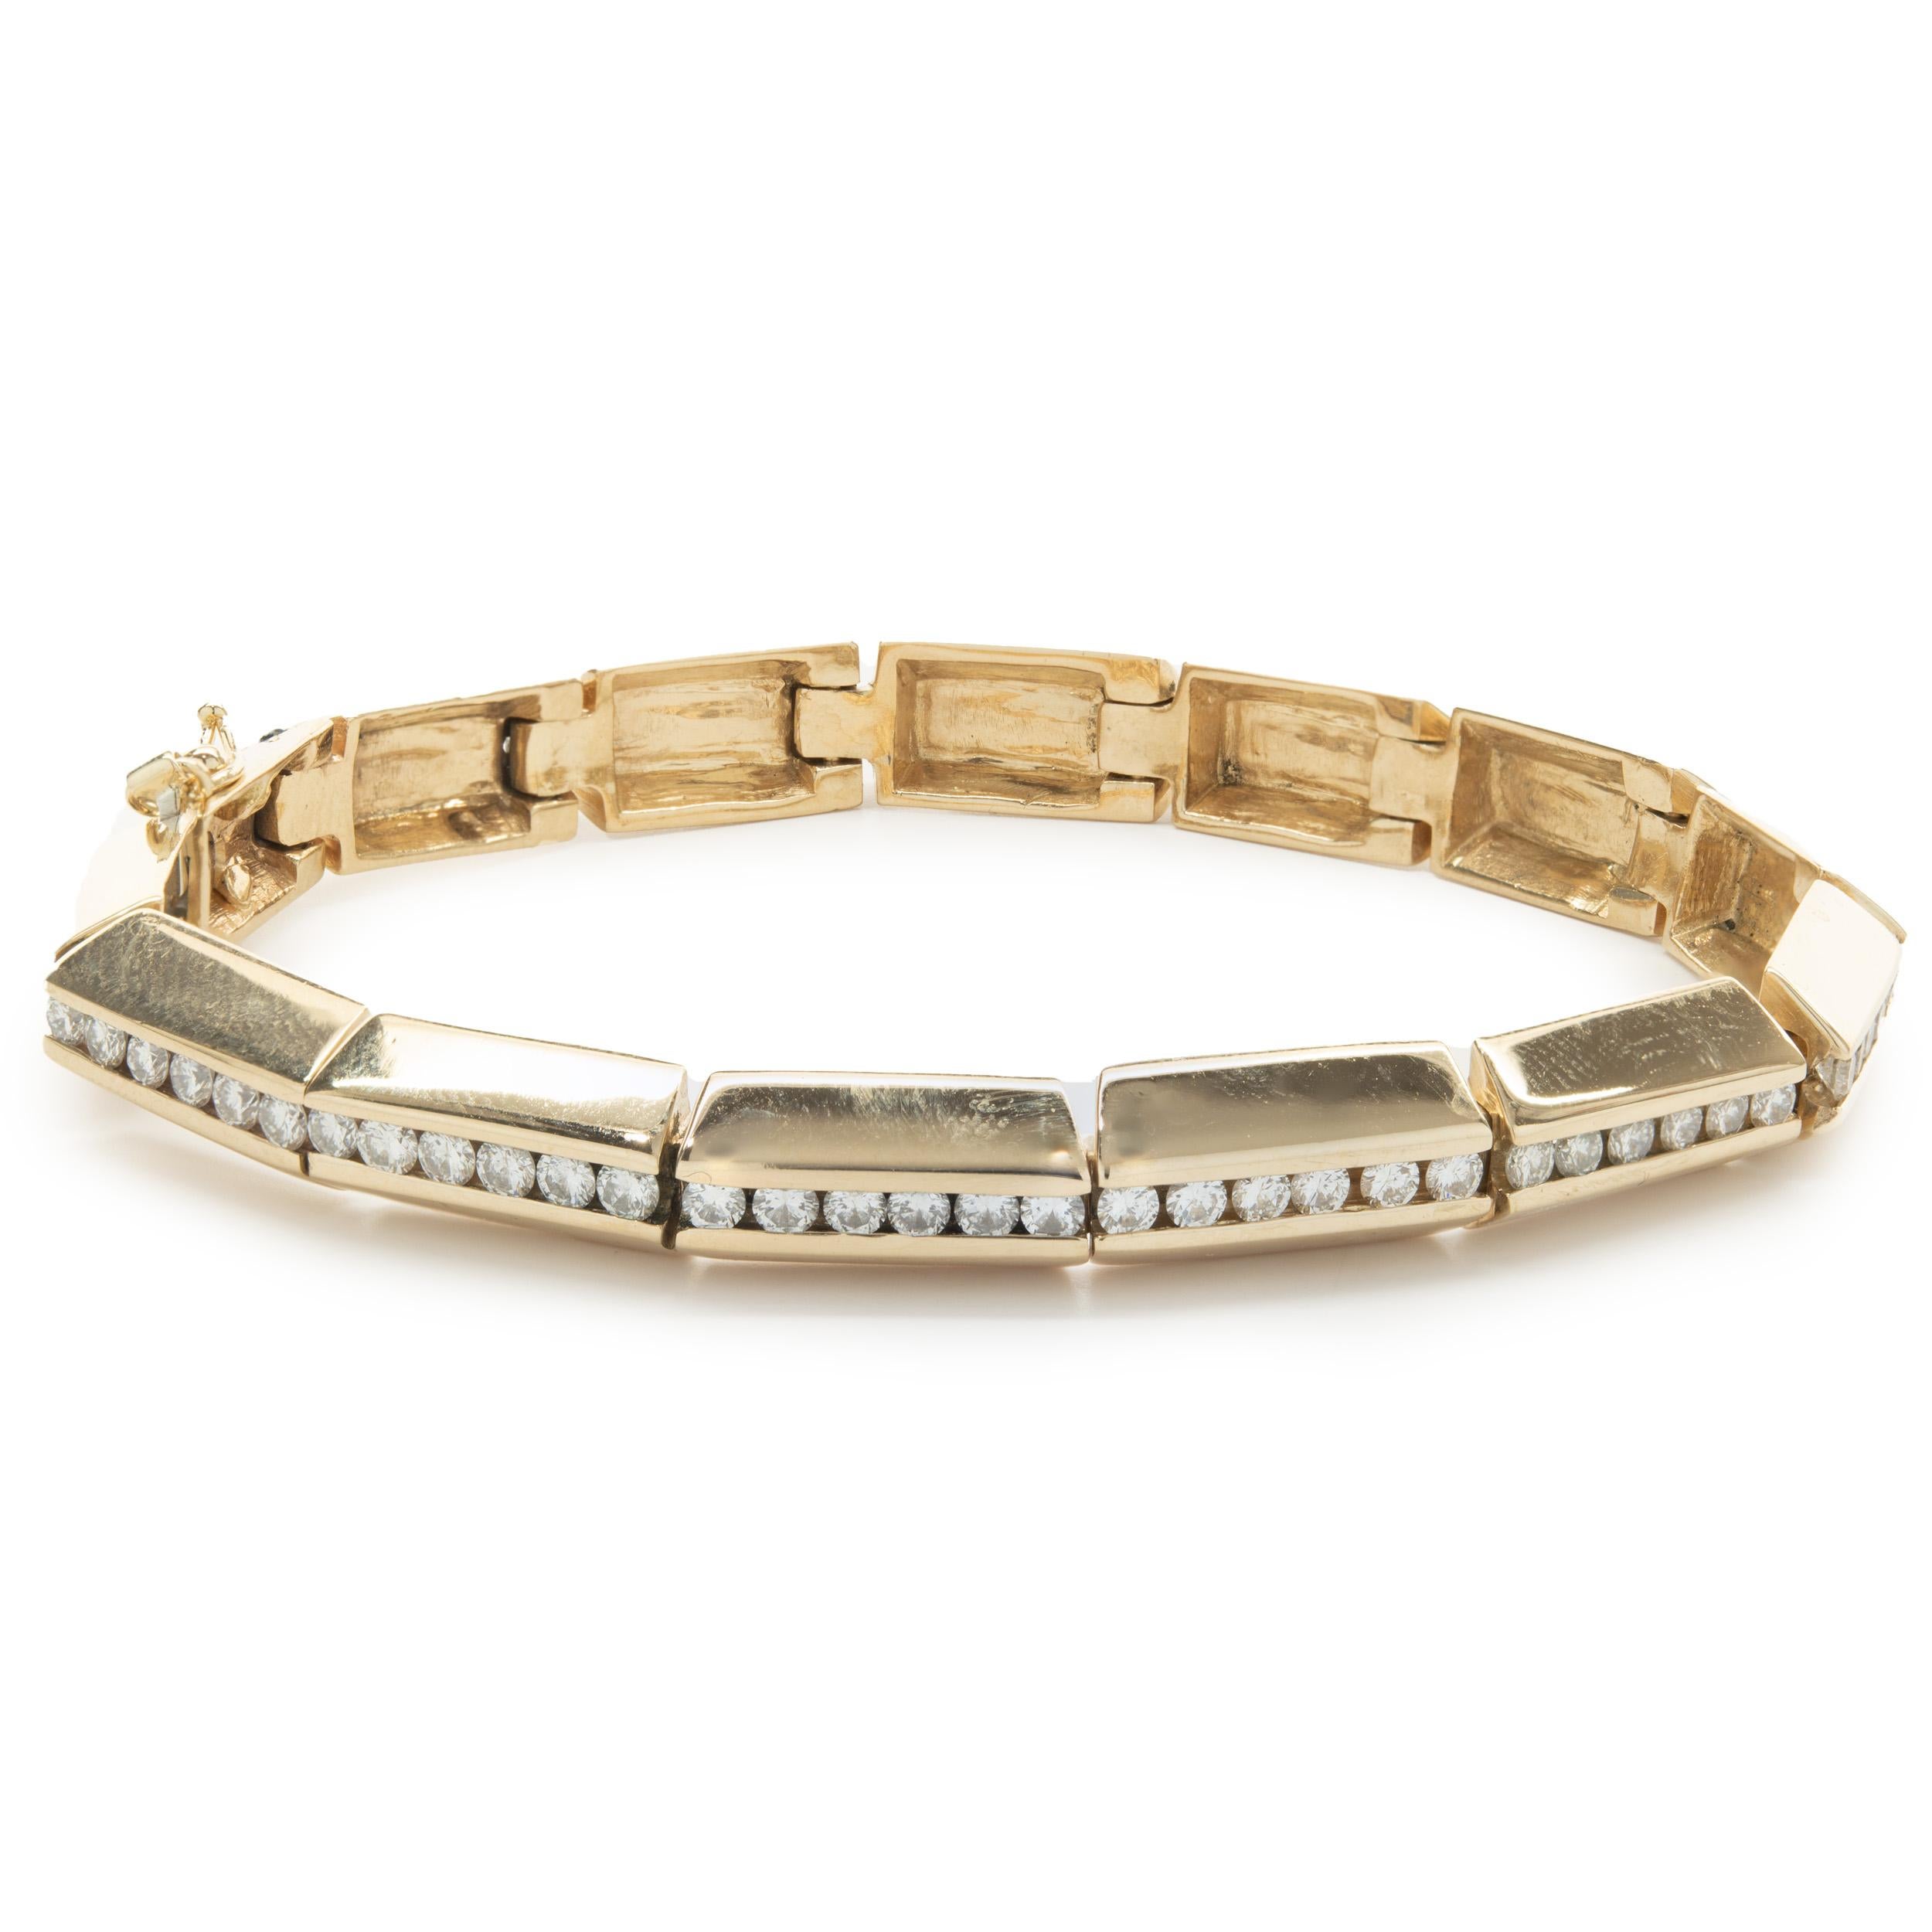 Designer: Gauthier
Material: 14K yellow gold
Diamond: 84 round brilliant cut = 2.52cttw
Color: G
Clarity: VS2 
Weight: 30.22 grams
Measurements: bracelet measures 7.5-inches in length